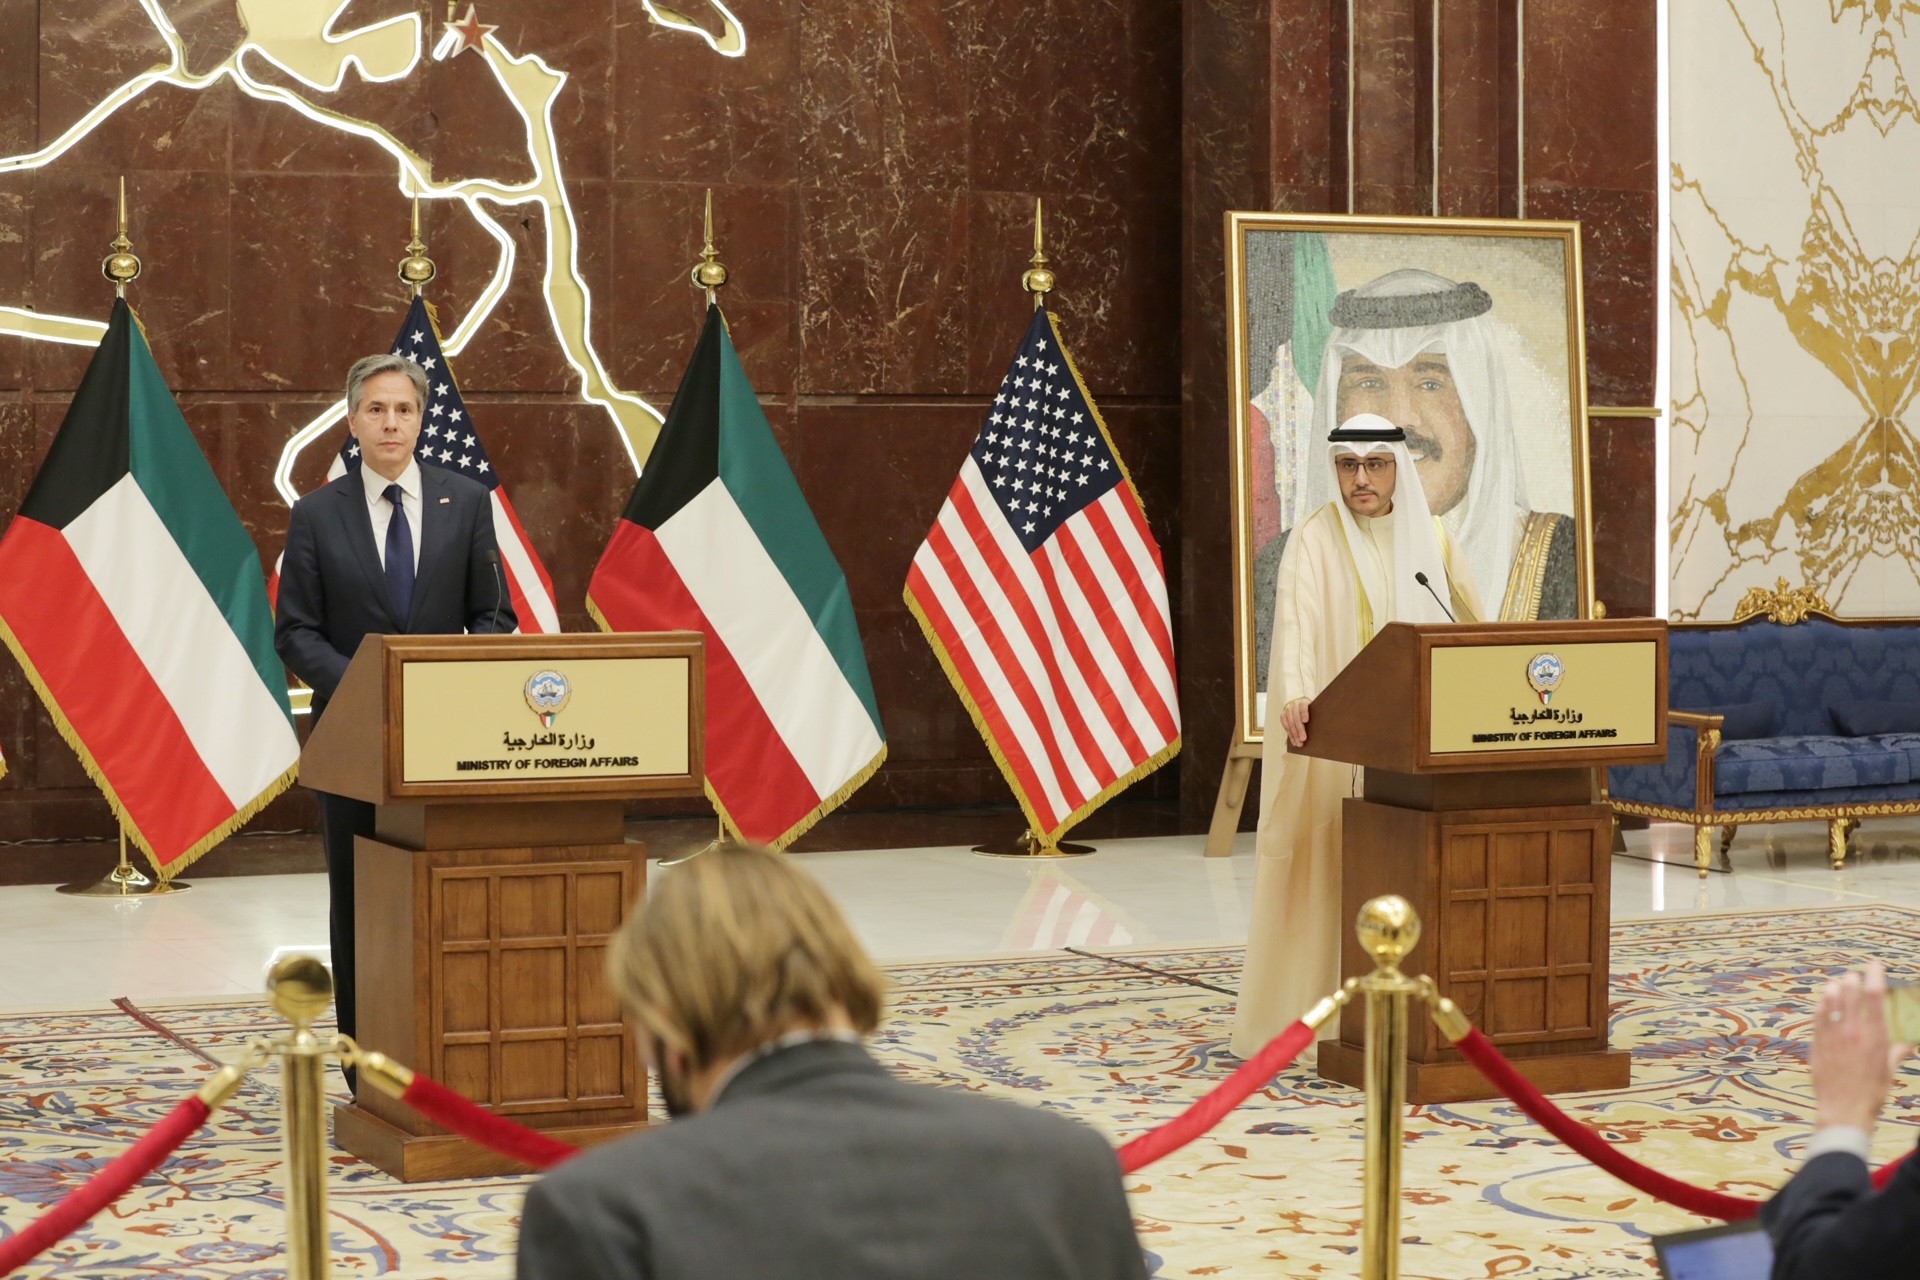 Kuwait FM and US Secretary of State hold press conference